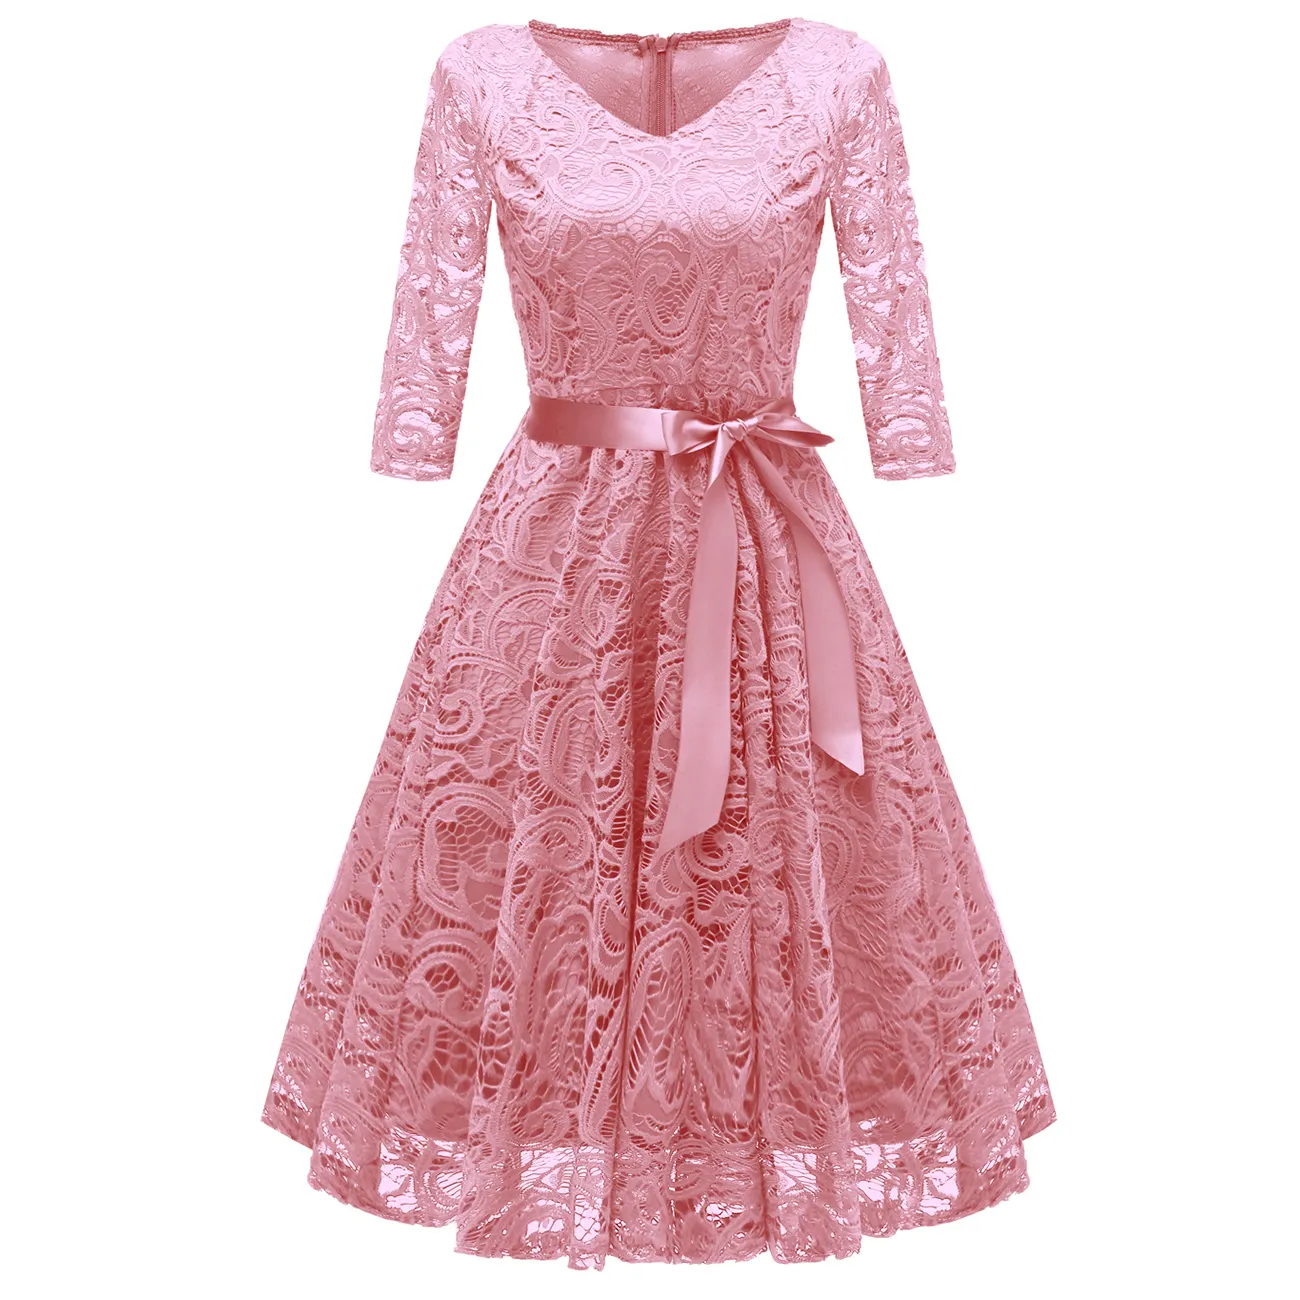 Pink 3/4 Sleeve Retro Summer Lace Feast Evening Party Dress for Women